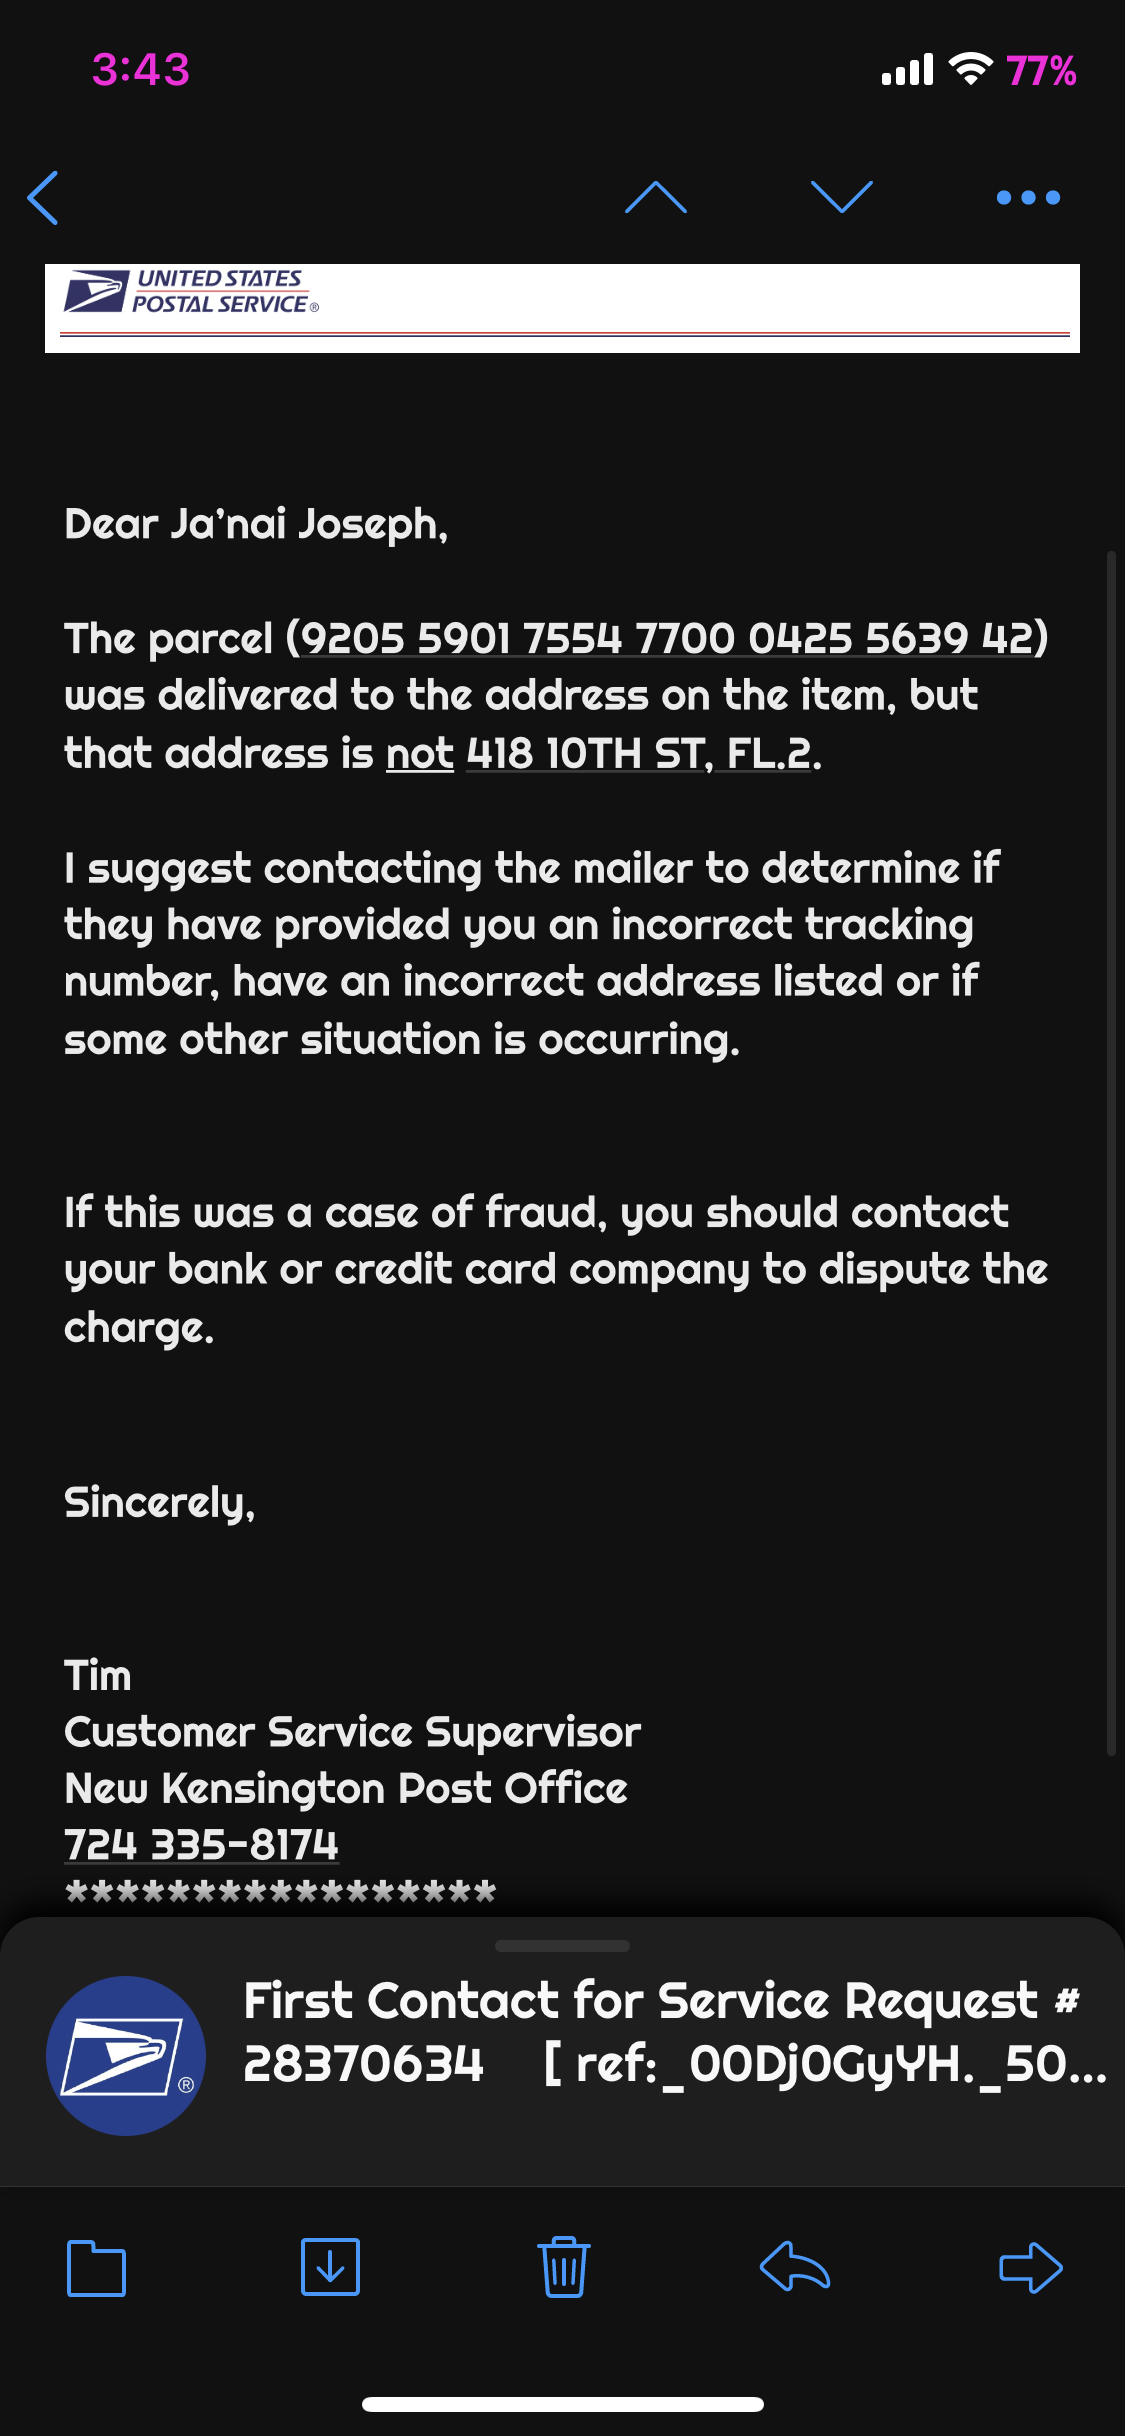 Wish complaint They took my money and sent my item to someone else